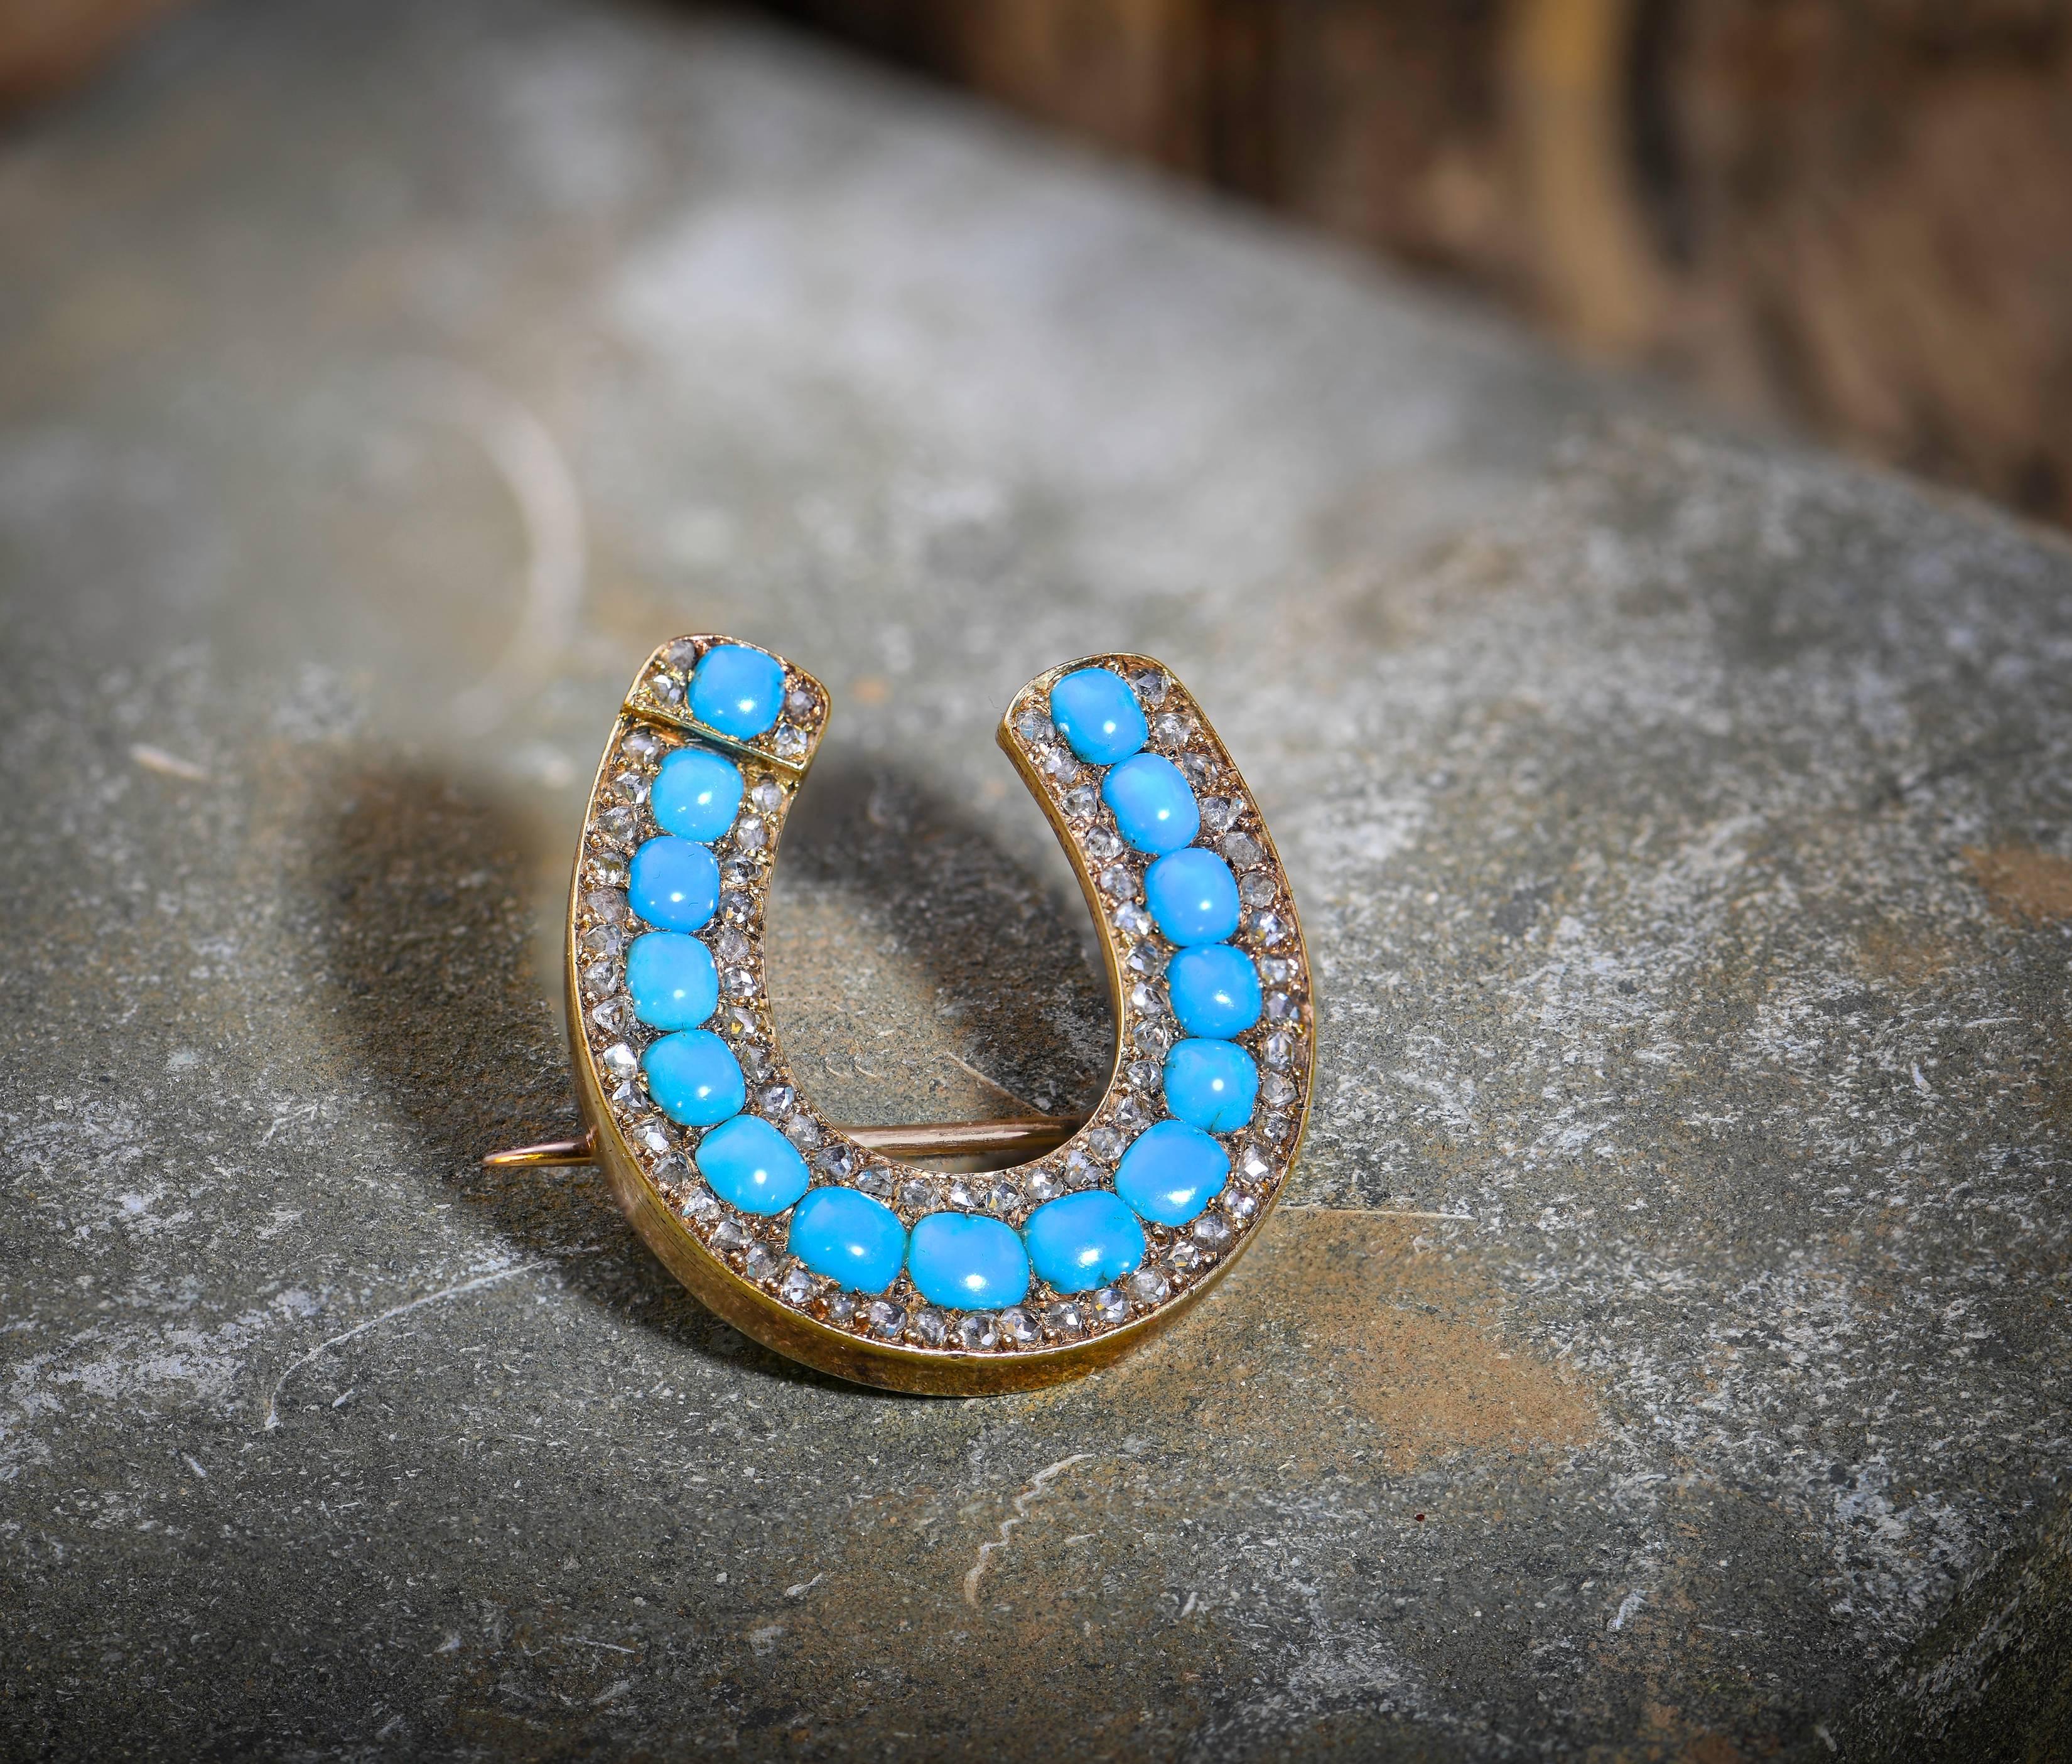 This lucky charm is beautiful too. A horseshoe is recognised as bringing luck across the western world. The only disagreement seems to be about which way up it should be. Whichever way you wear it, the striking blue of the turquoise and sparkle of